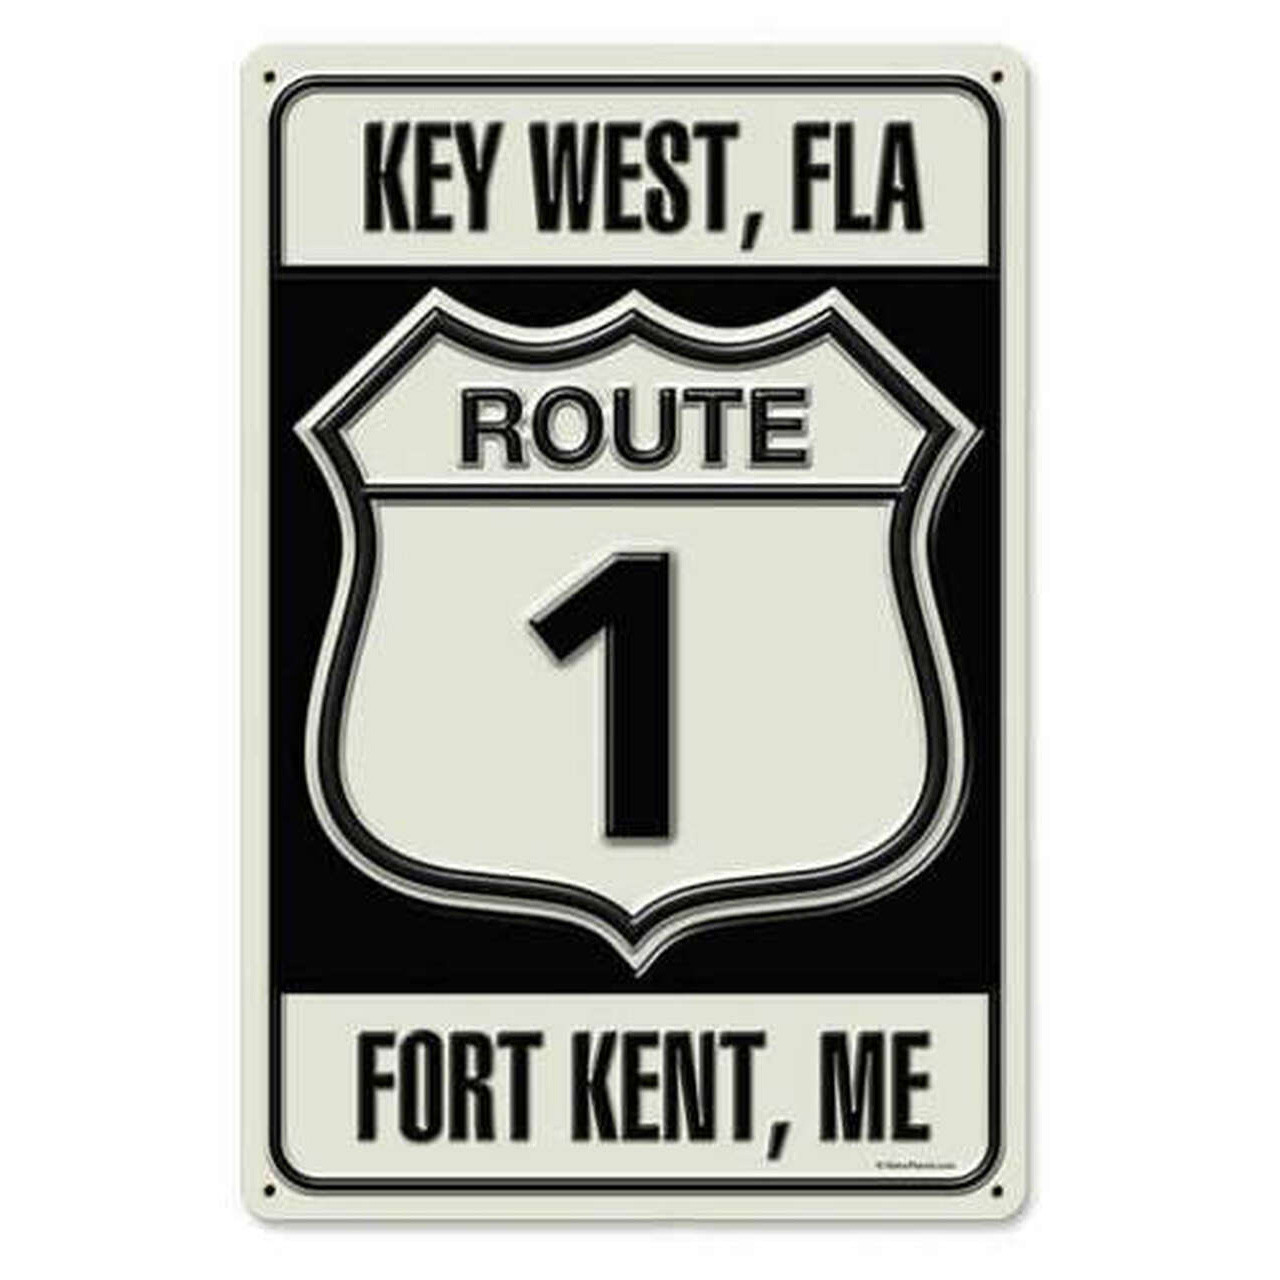 Retro Route 1 Metal Sign  18 x 12 Inches